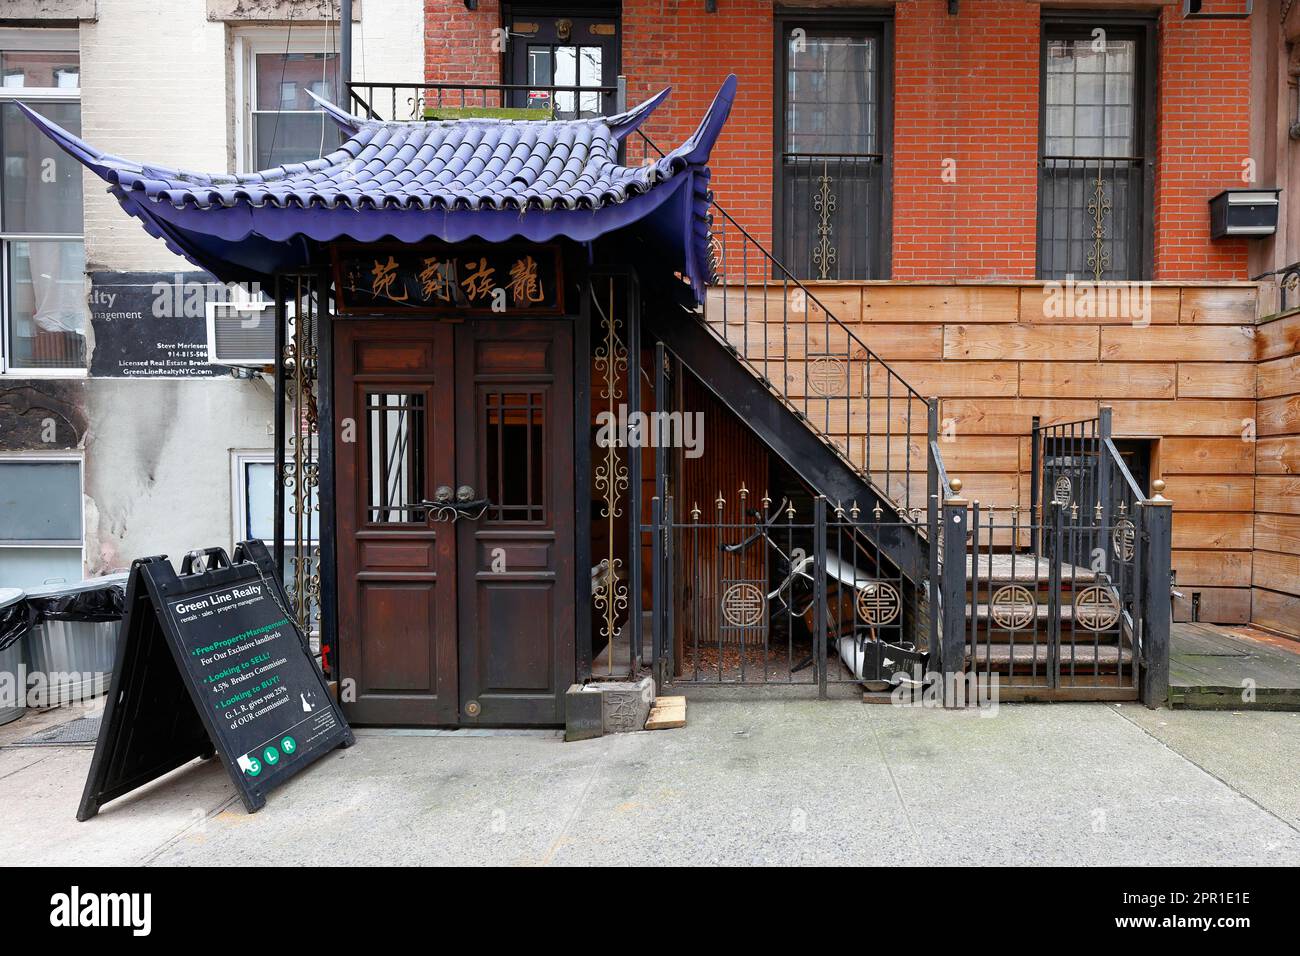 114 E 31st St, New York. A building with decorative Oriental style architecture at the entrance. Stock Photo